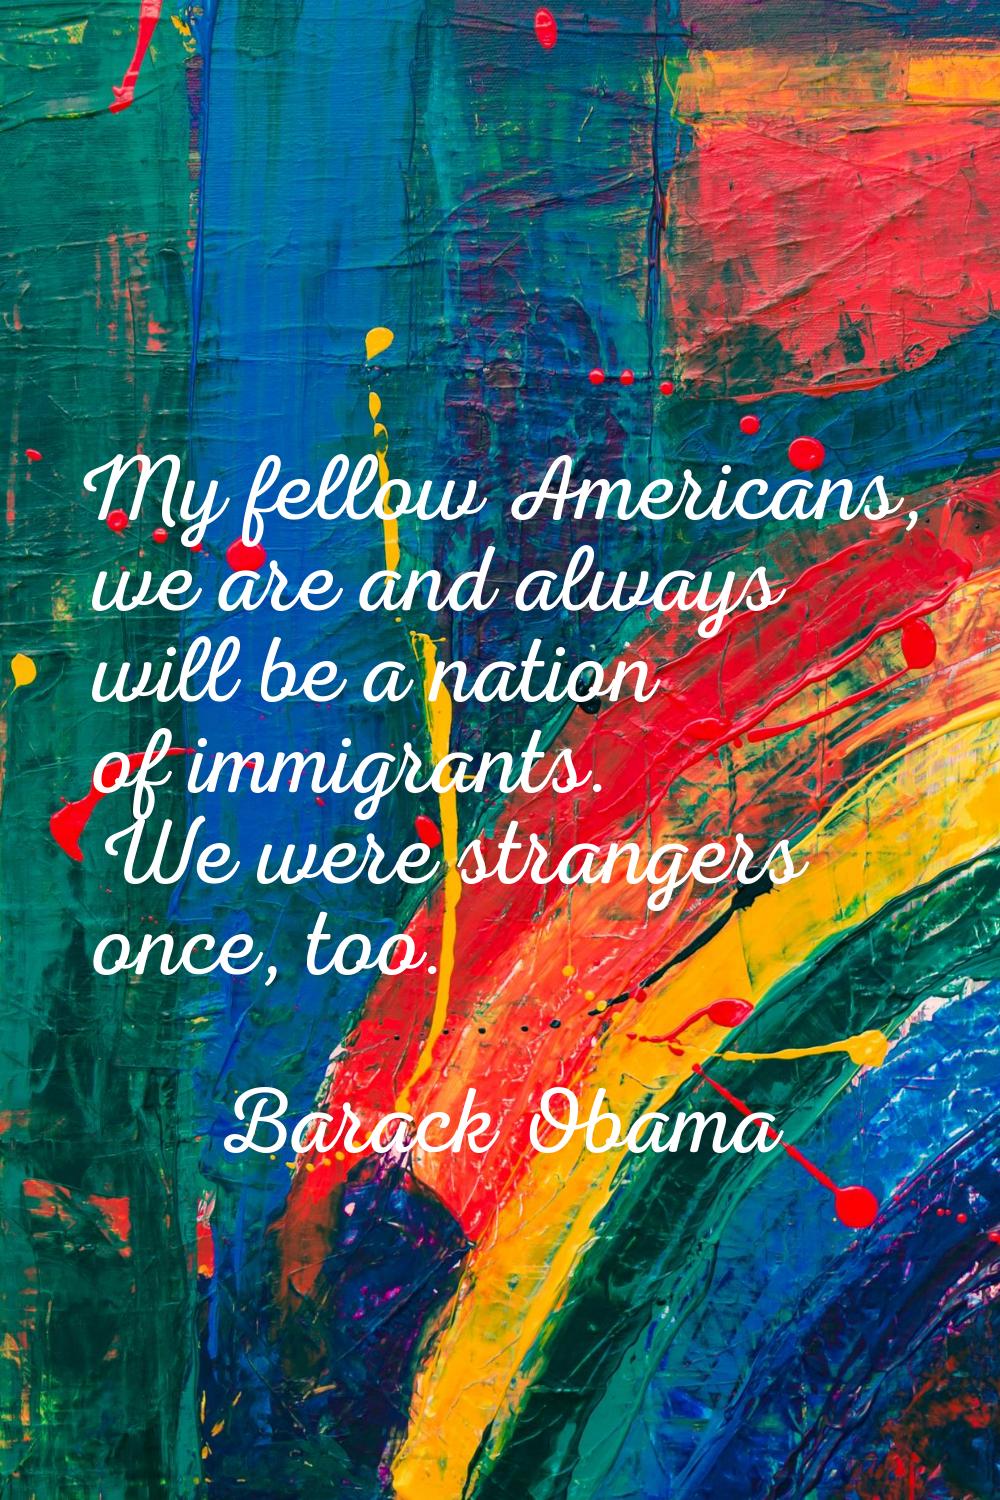 My fellow Americans, we are and always will be a nation of immigrants. We were strangers once, too.